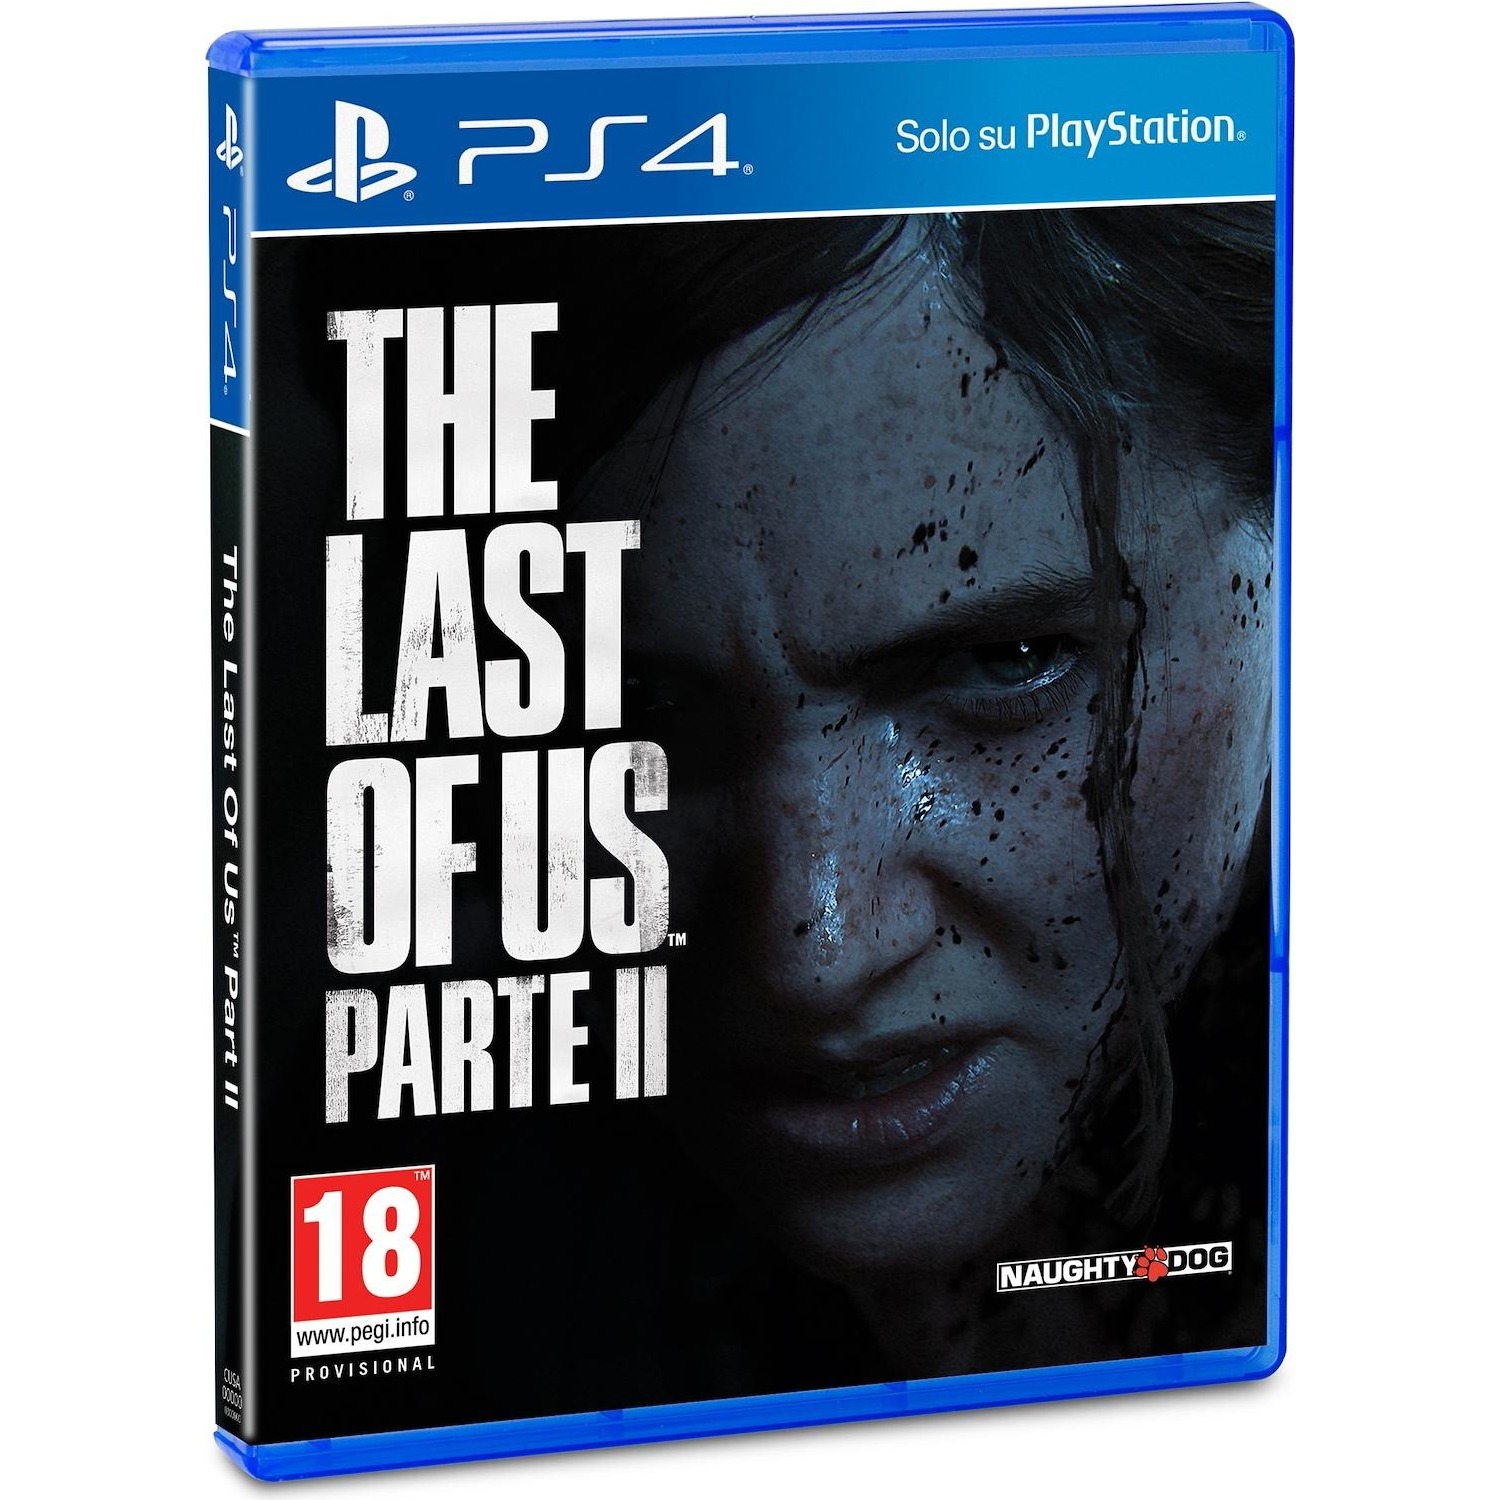 Image of Gioco PS4 The Last Of Us parte II